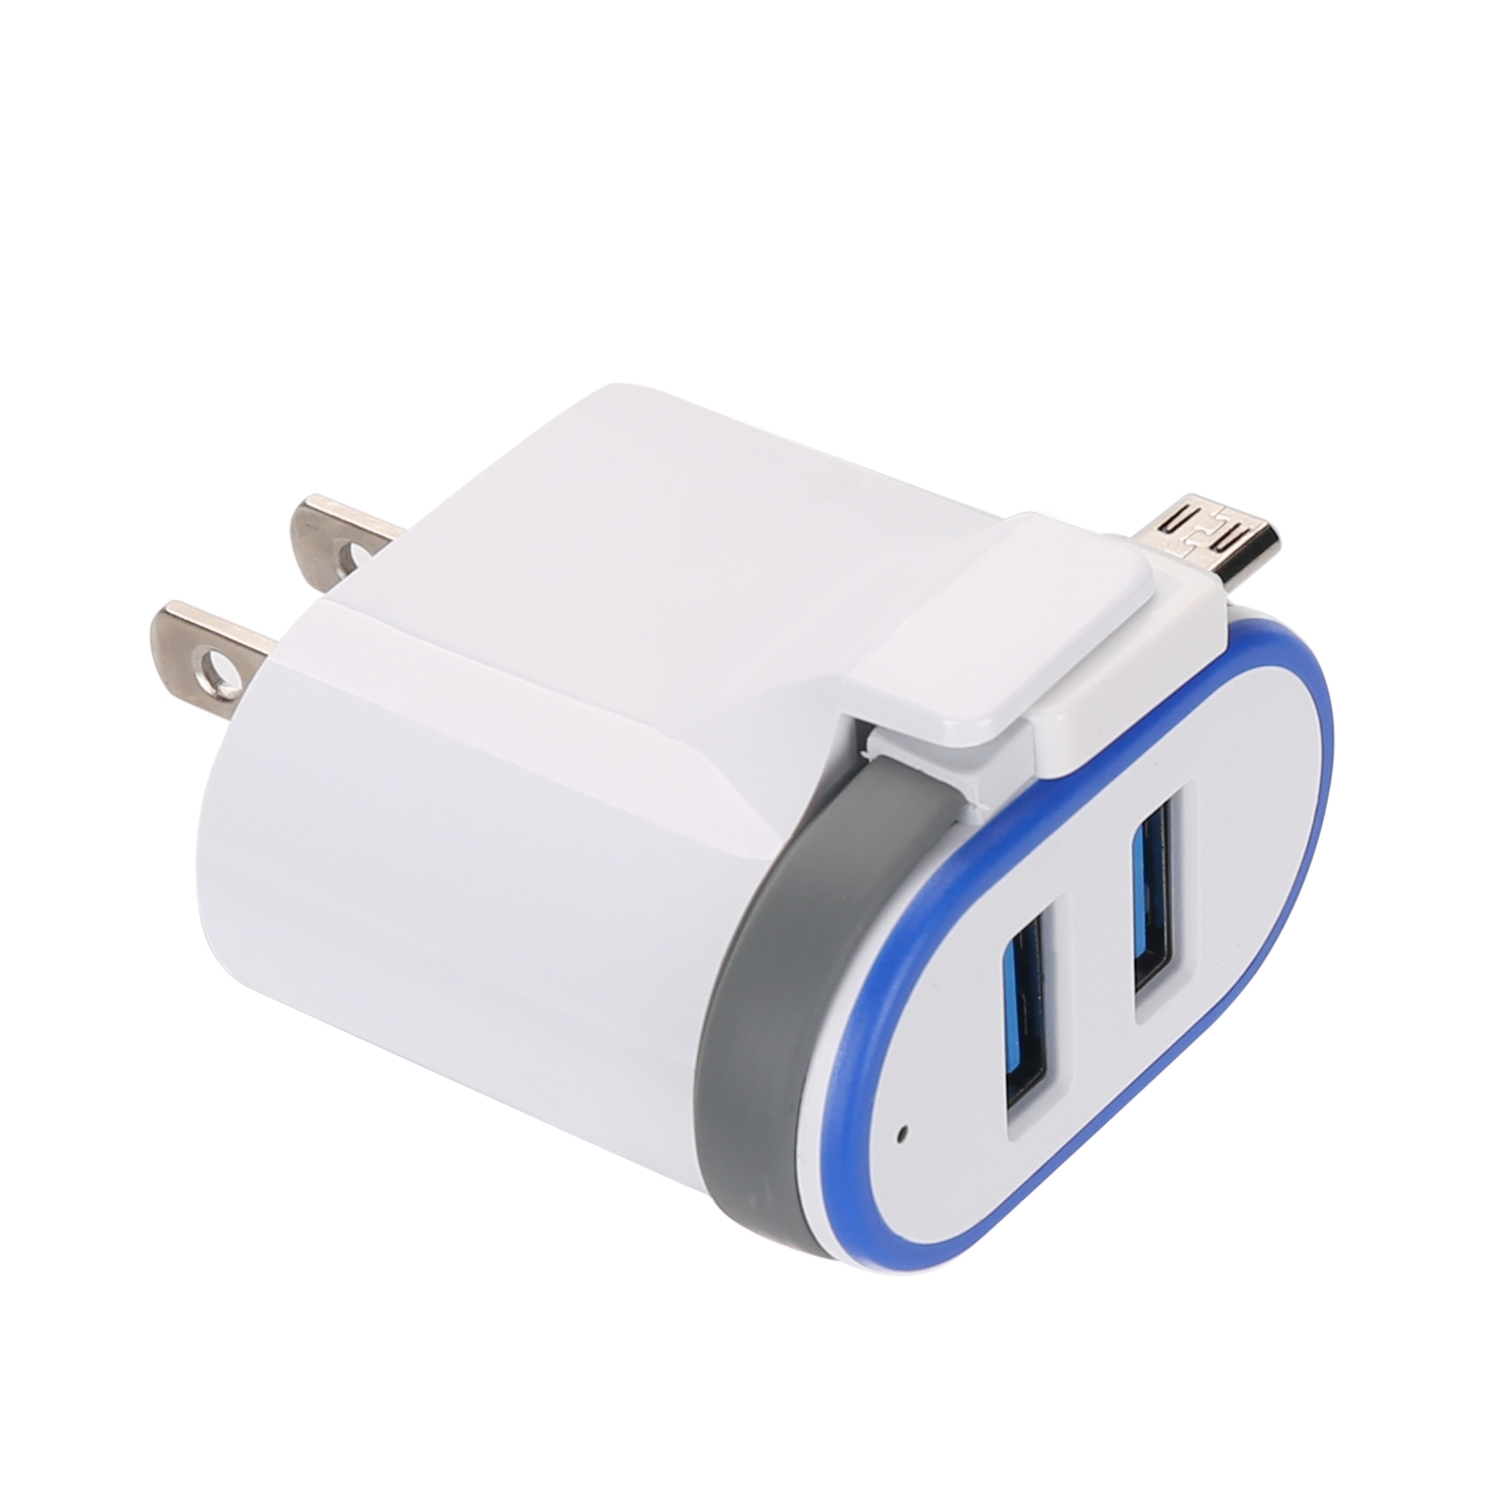 2.1Amp dual USB Home Charger With Micro USB Cable